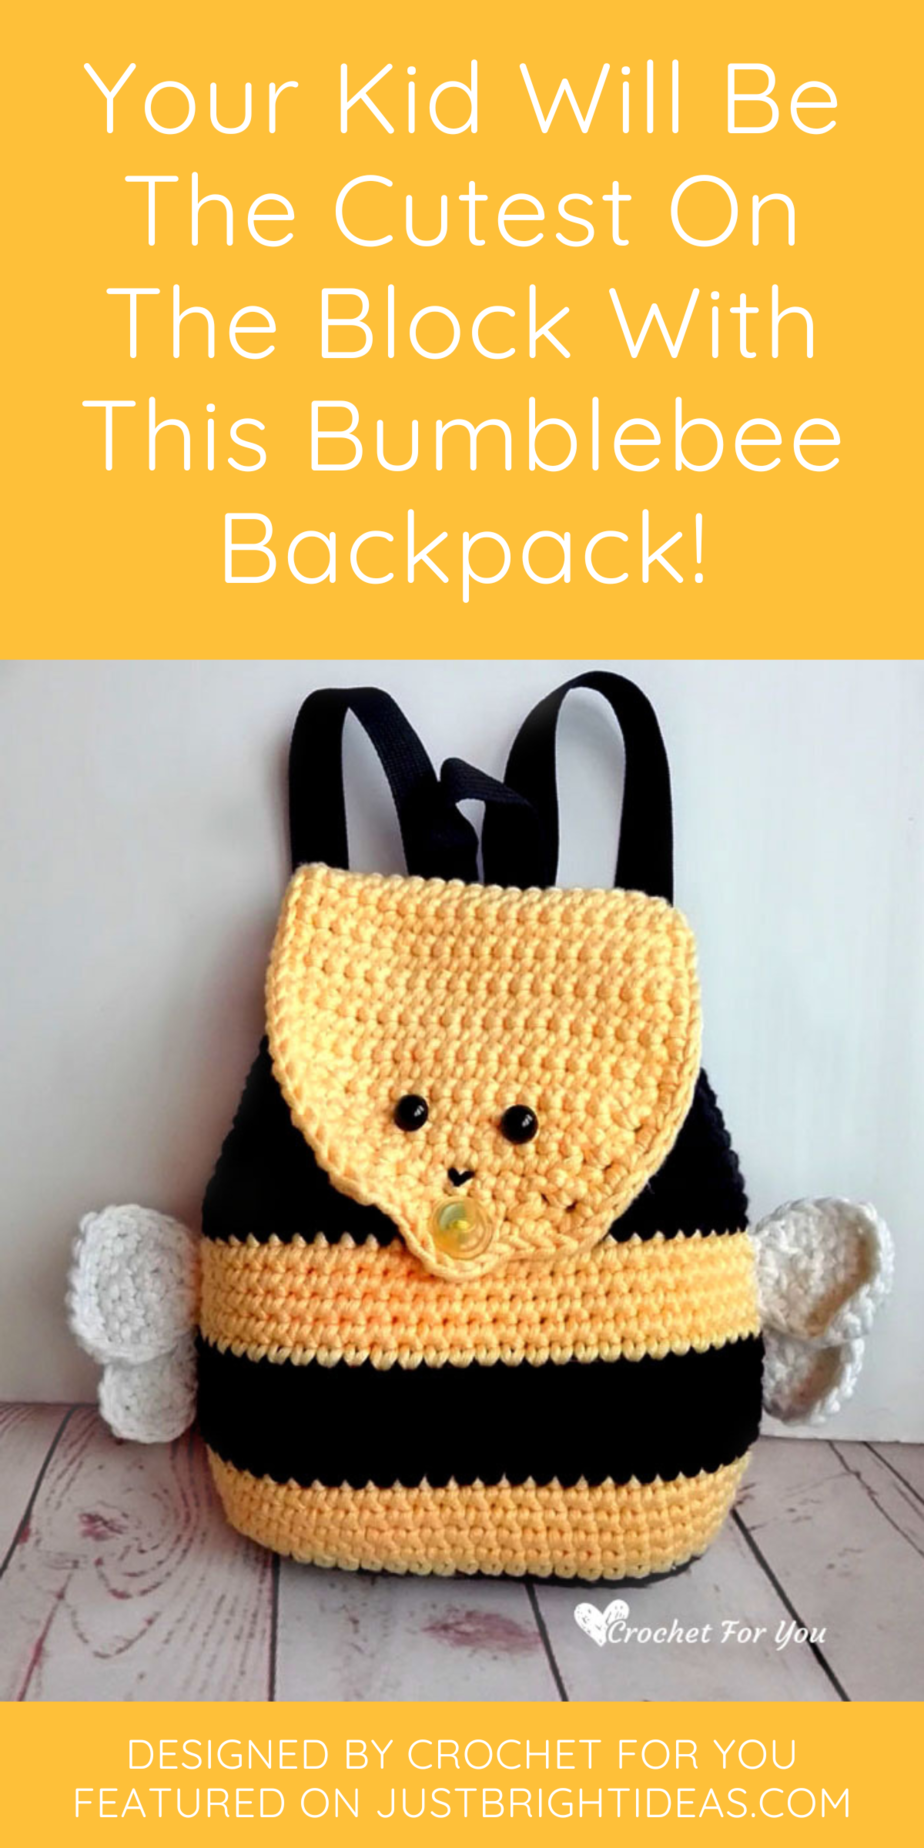 Your Kid Will Be The Cutest On The Block With This Bumblebee Backpack!
